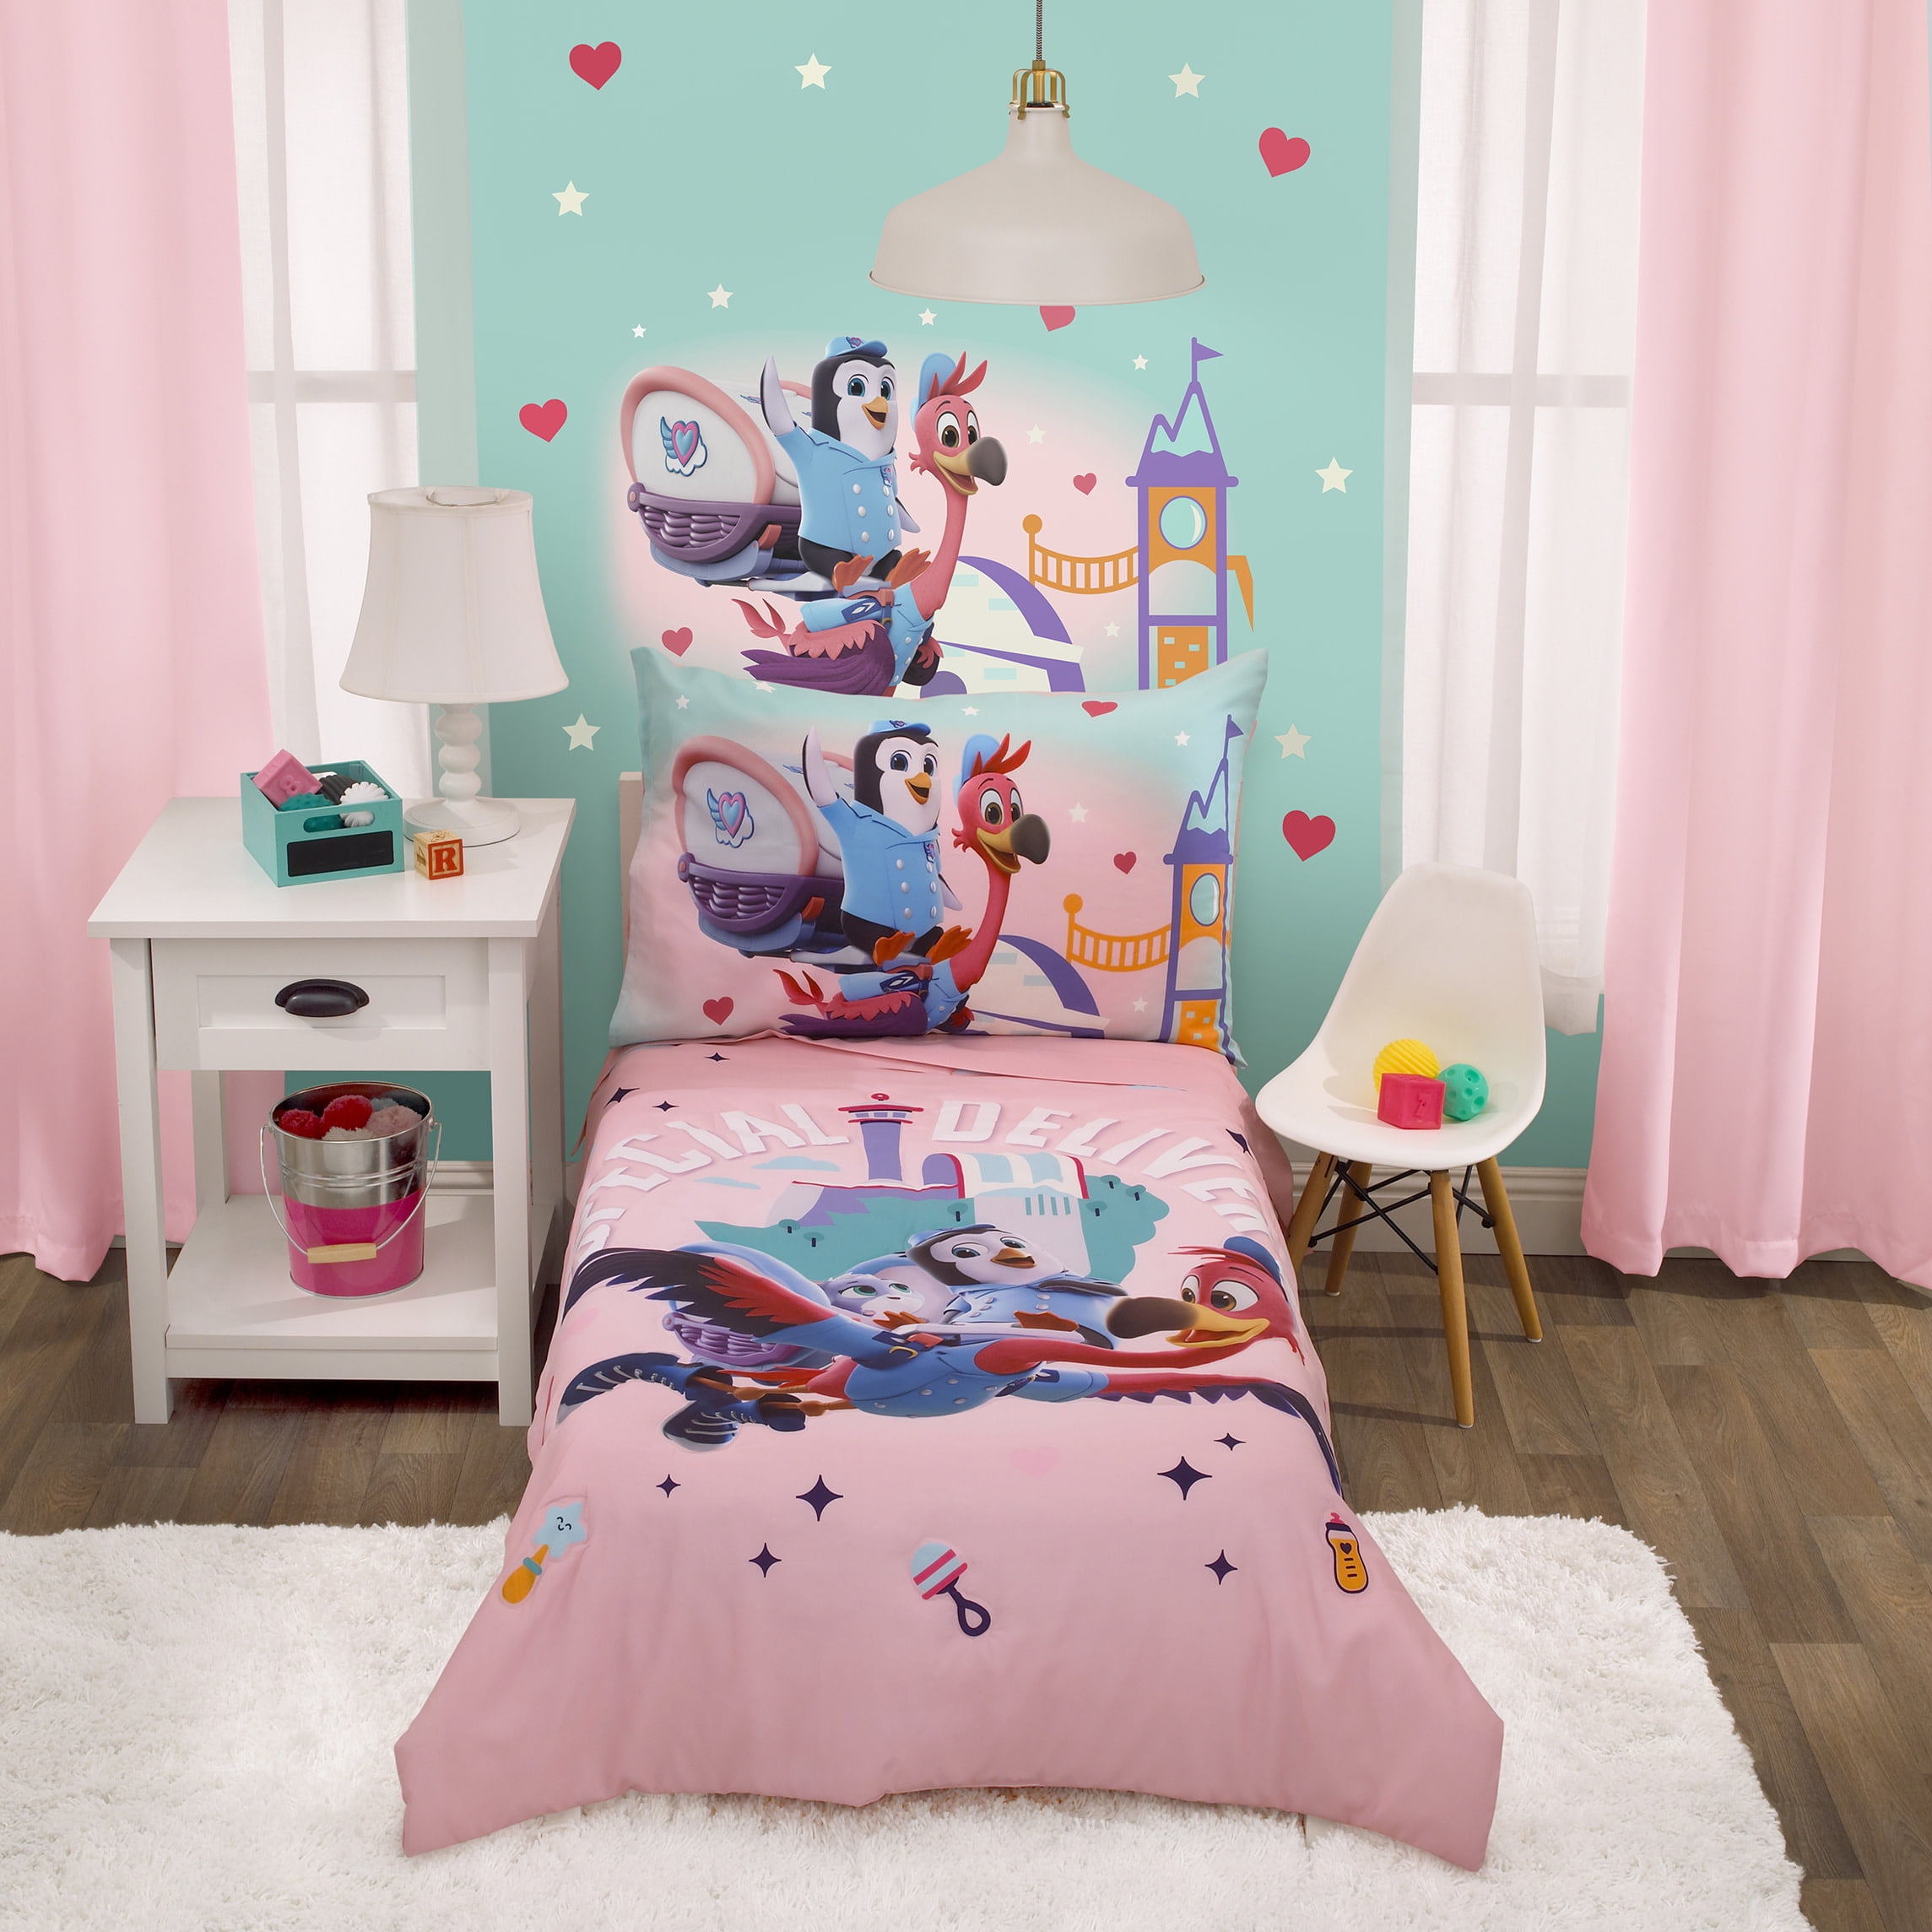 HR.charm Cocomelon Ultra Soft Microfiber Teen Bedding for Girls Bedroom 3-Piece Pillowcase 86¡±X70